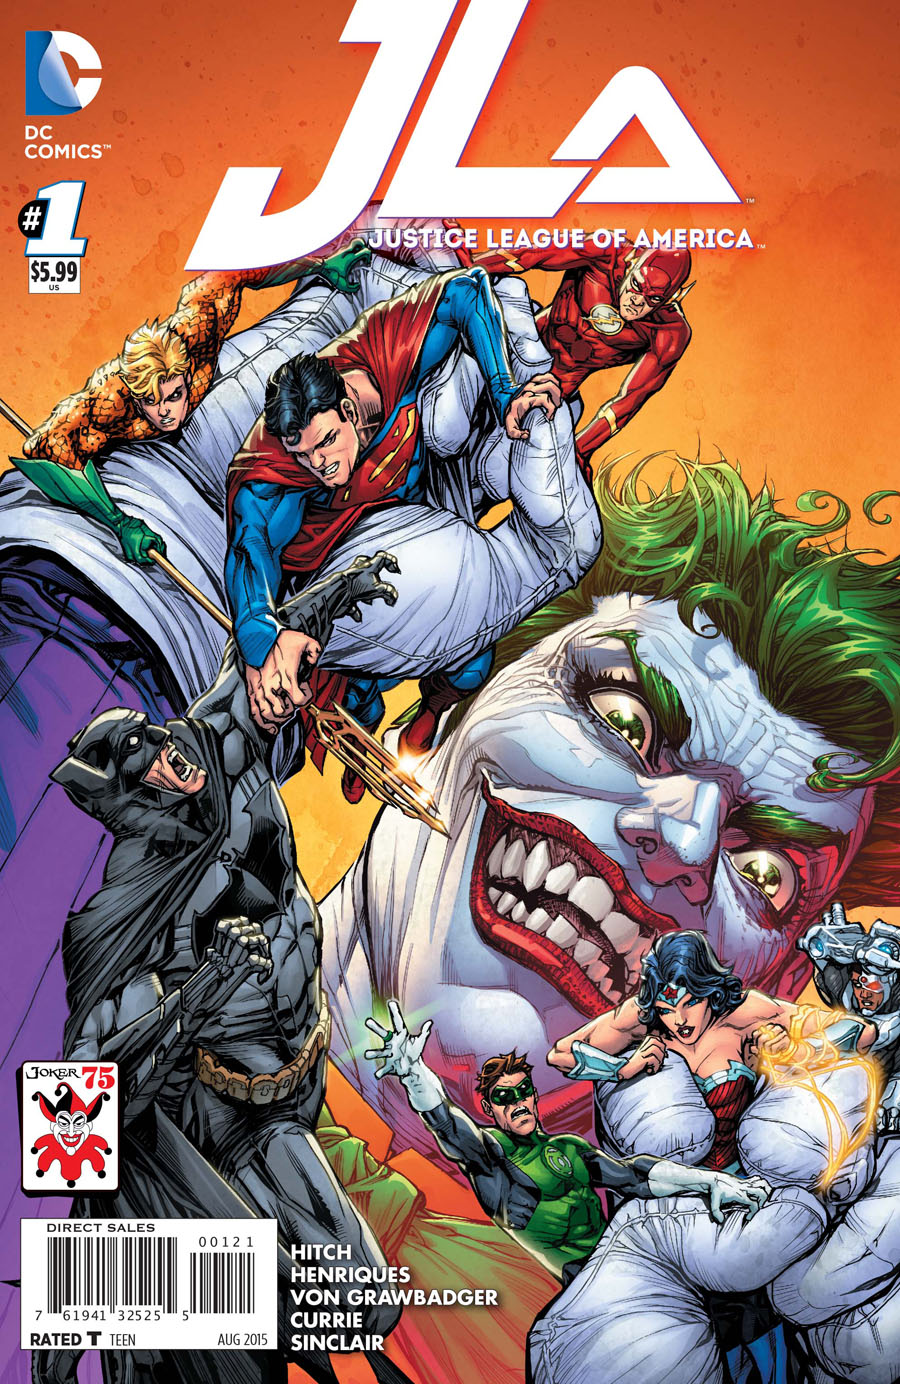 Justice League Of America Vol 4 #1 Cover B Variant Howard Porter The Joker 75th Anniversary Cover